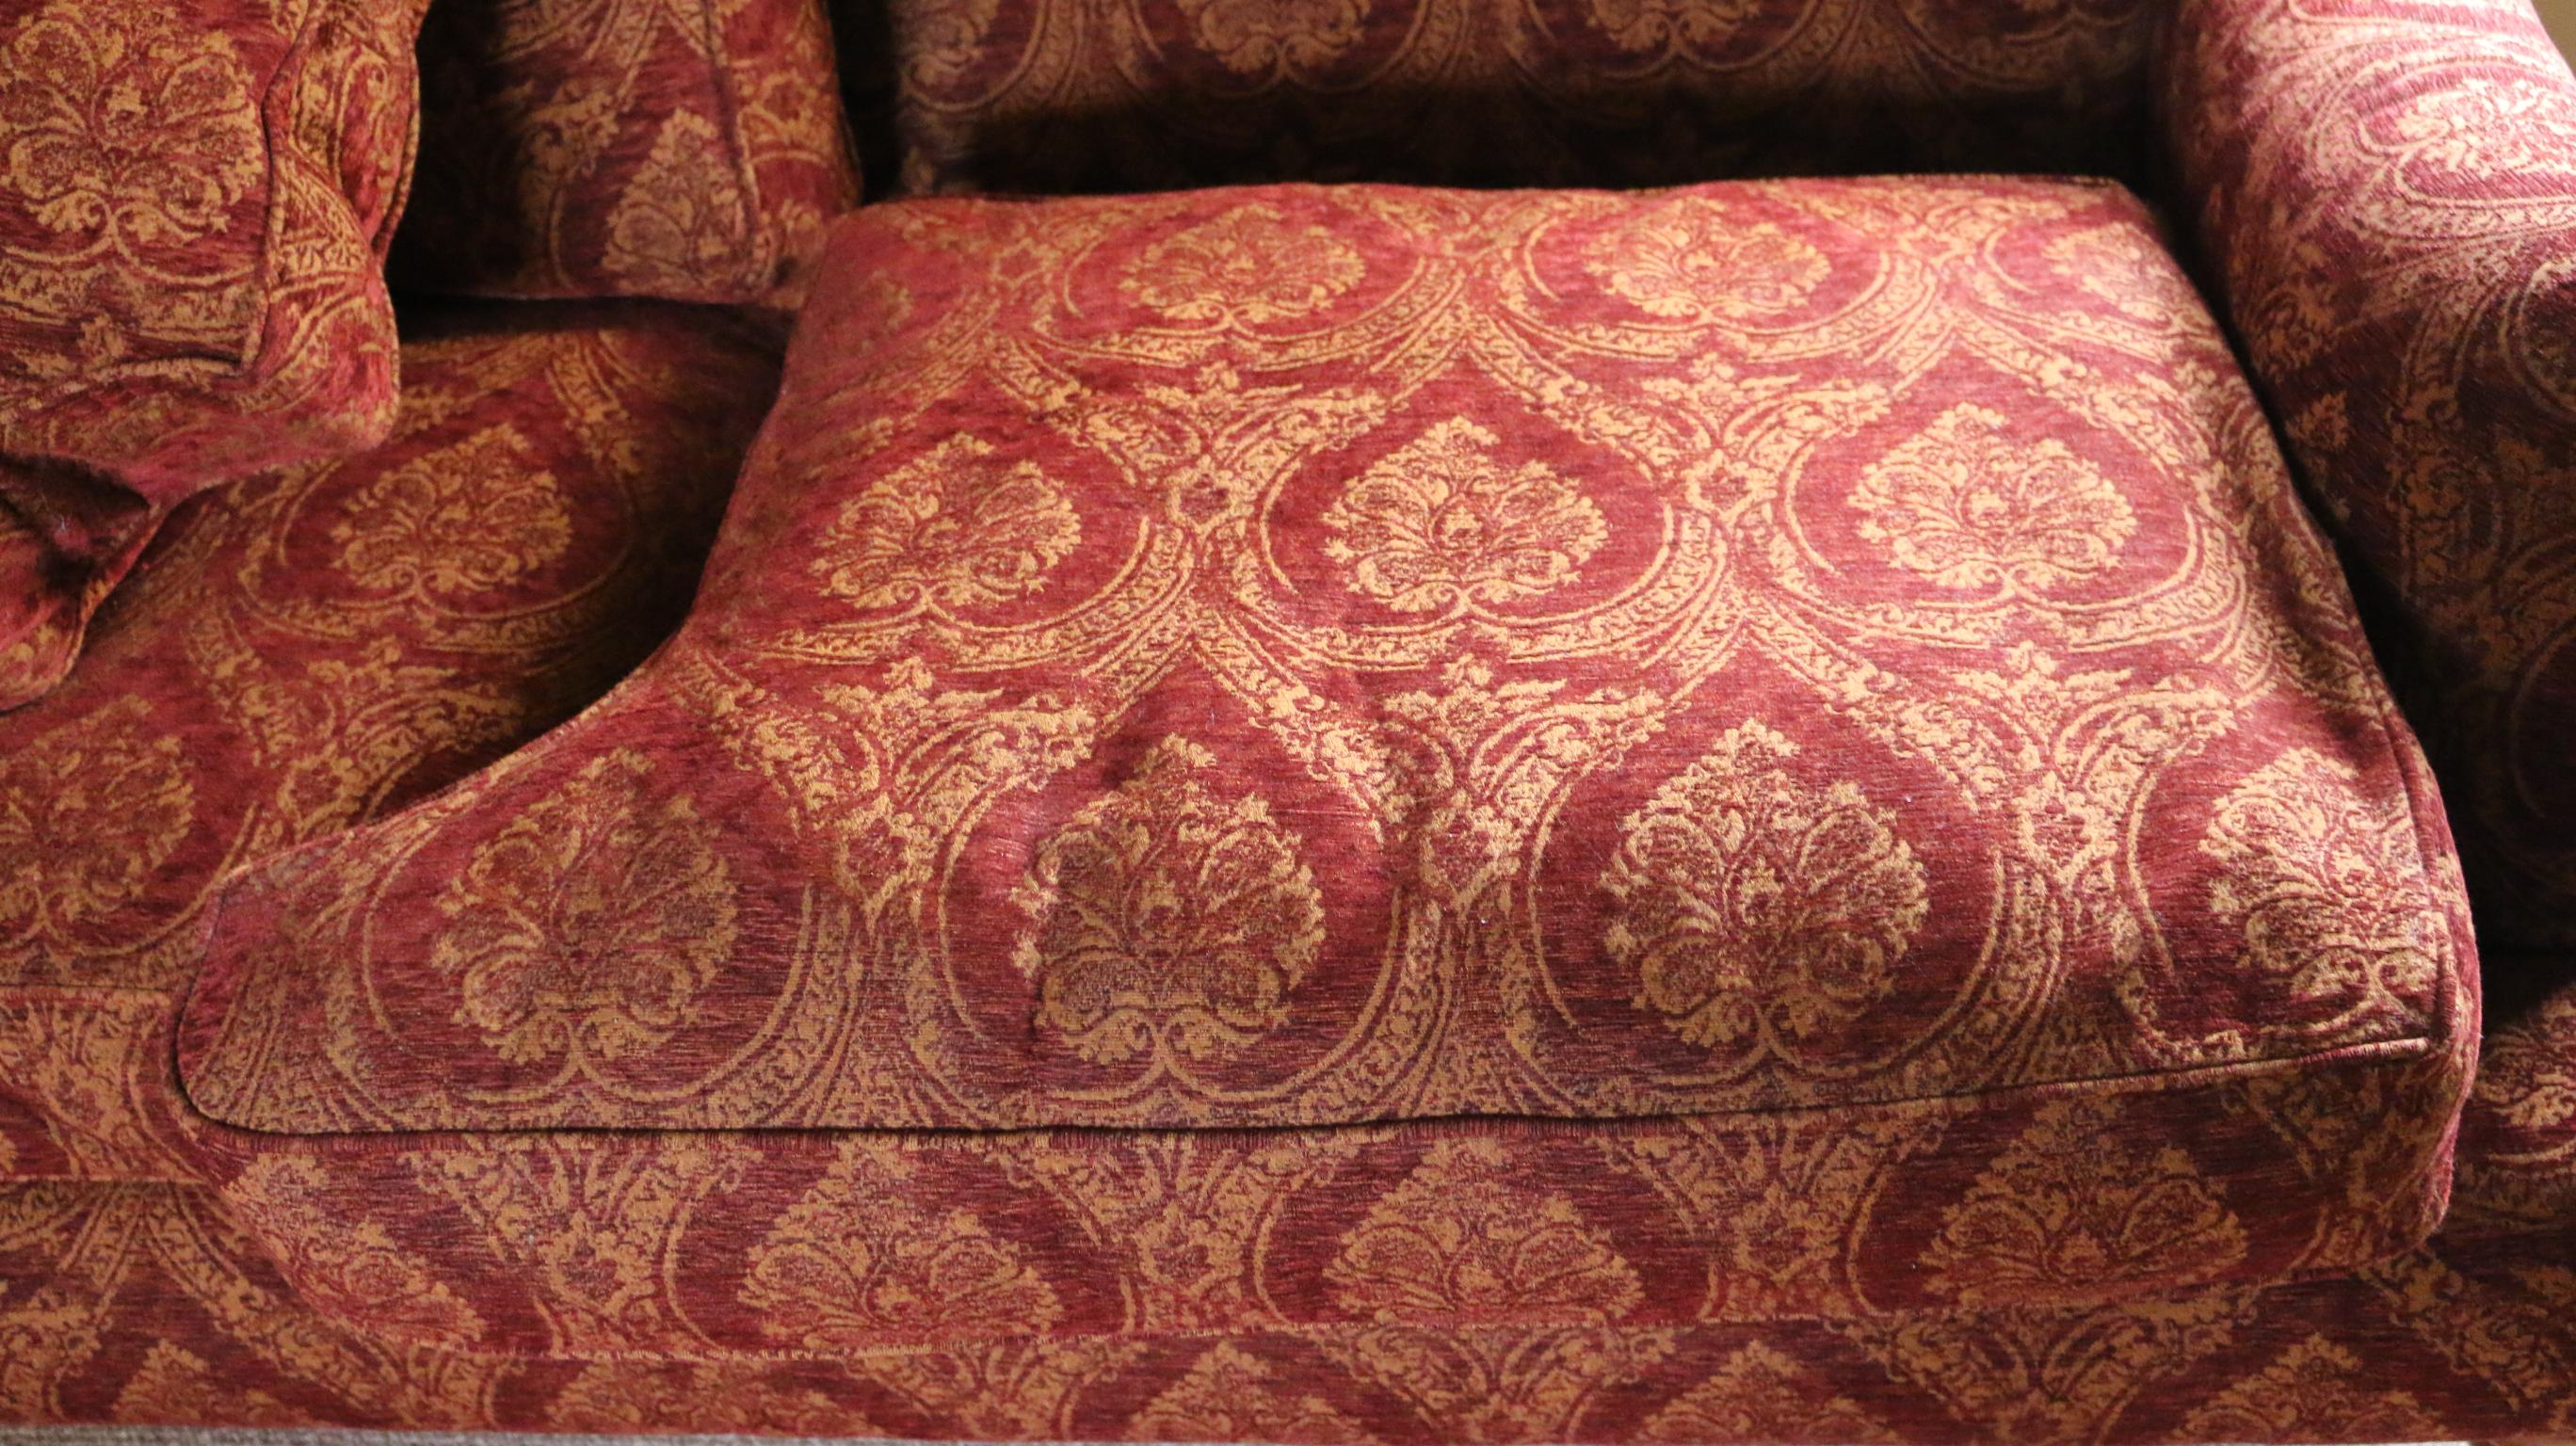 Late 20th Century Settee Sofa 3-Seat Howard Parker & Farr Red-Wine Gold Mulberry Paisley